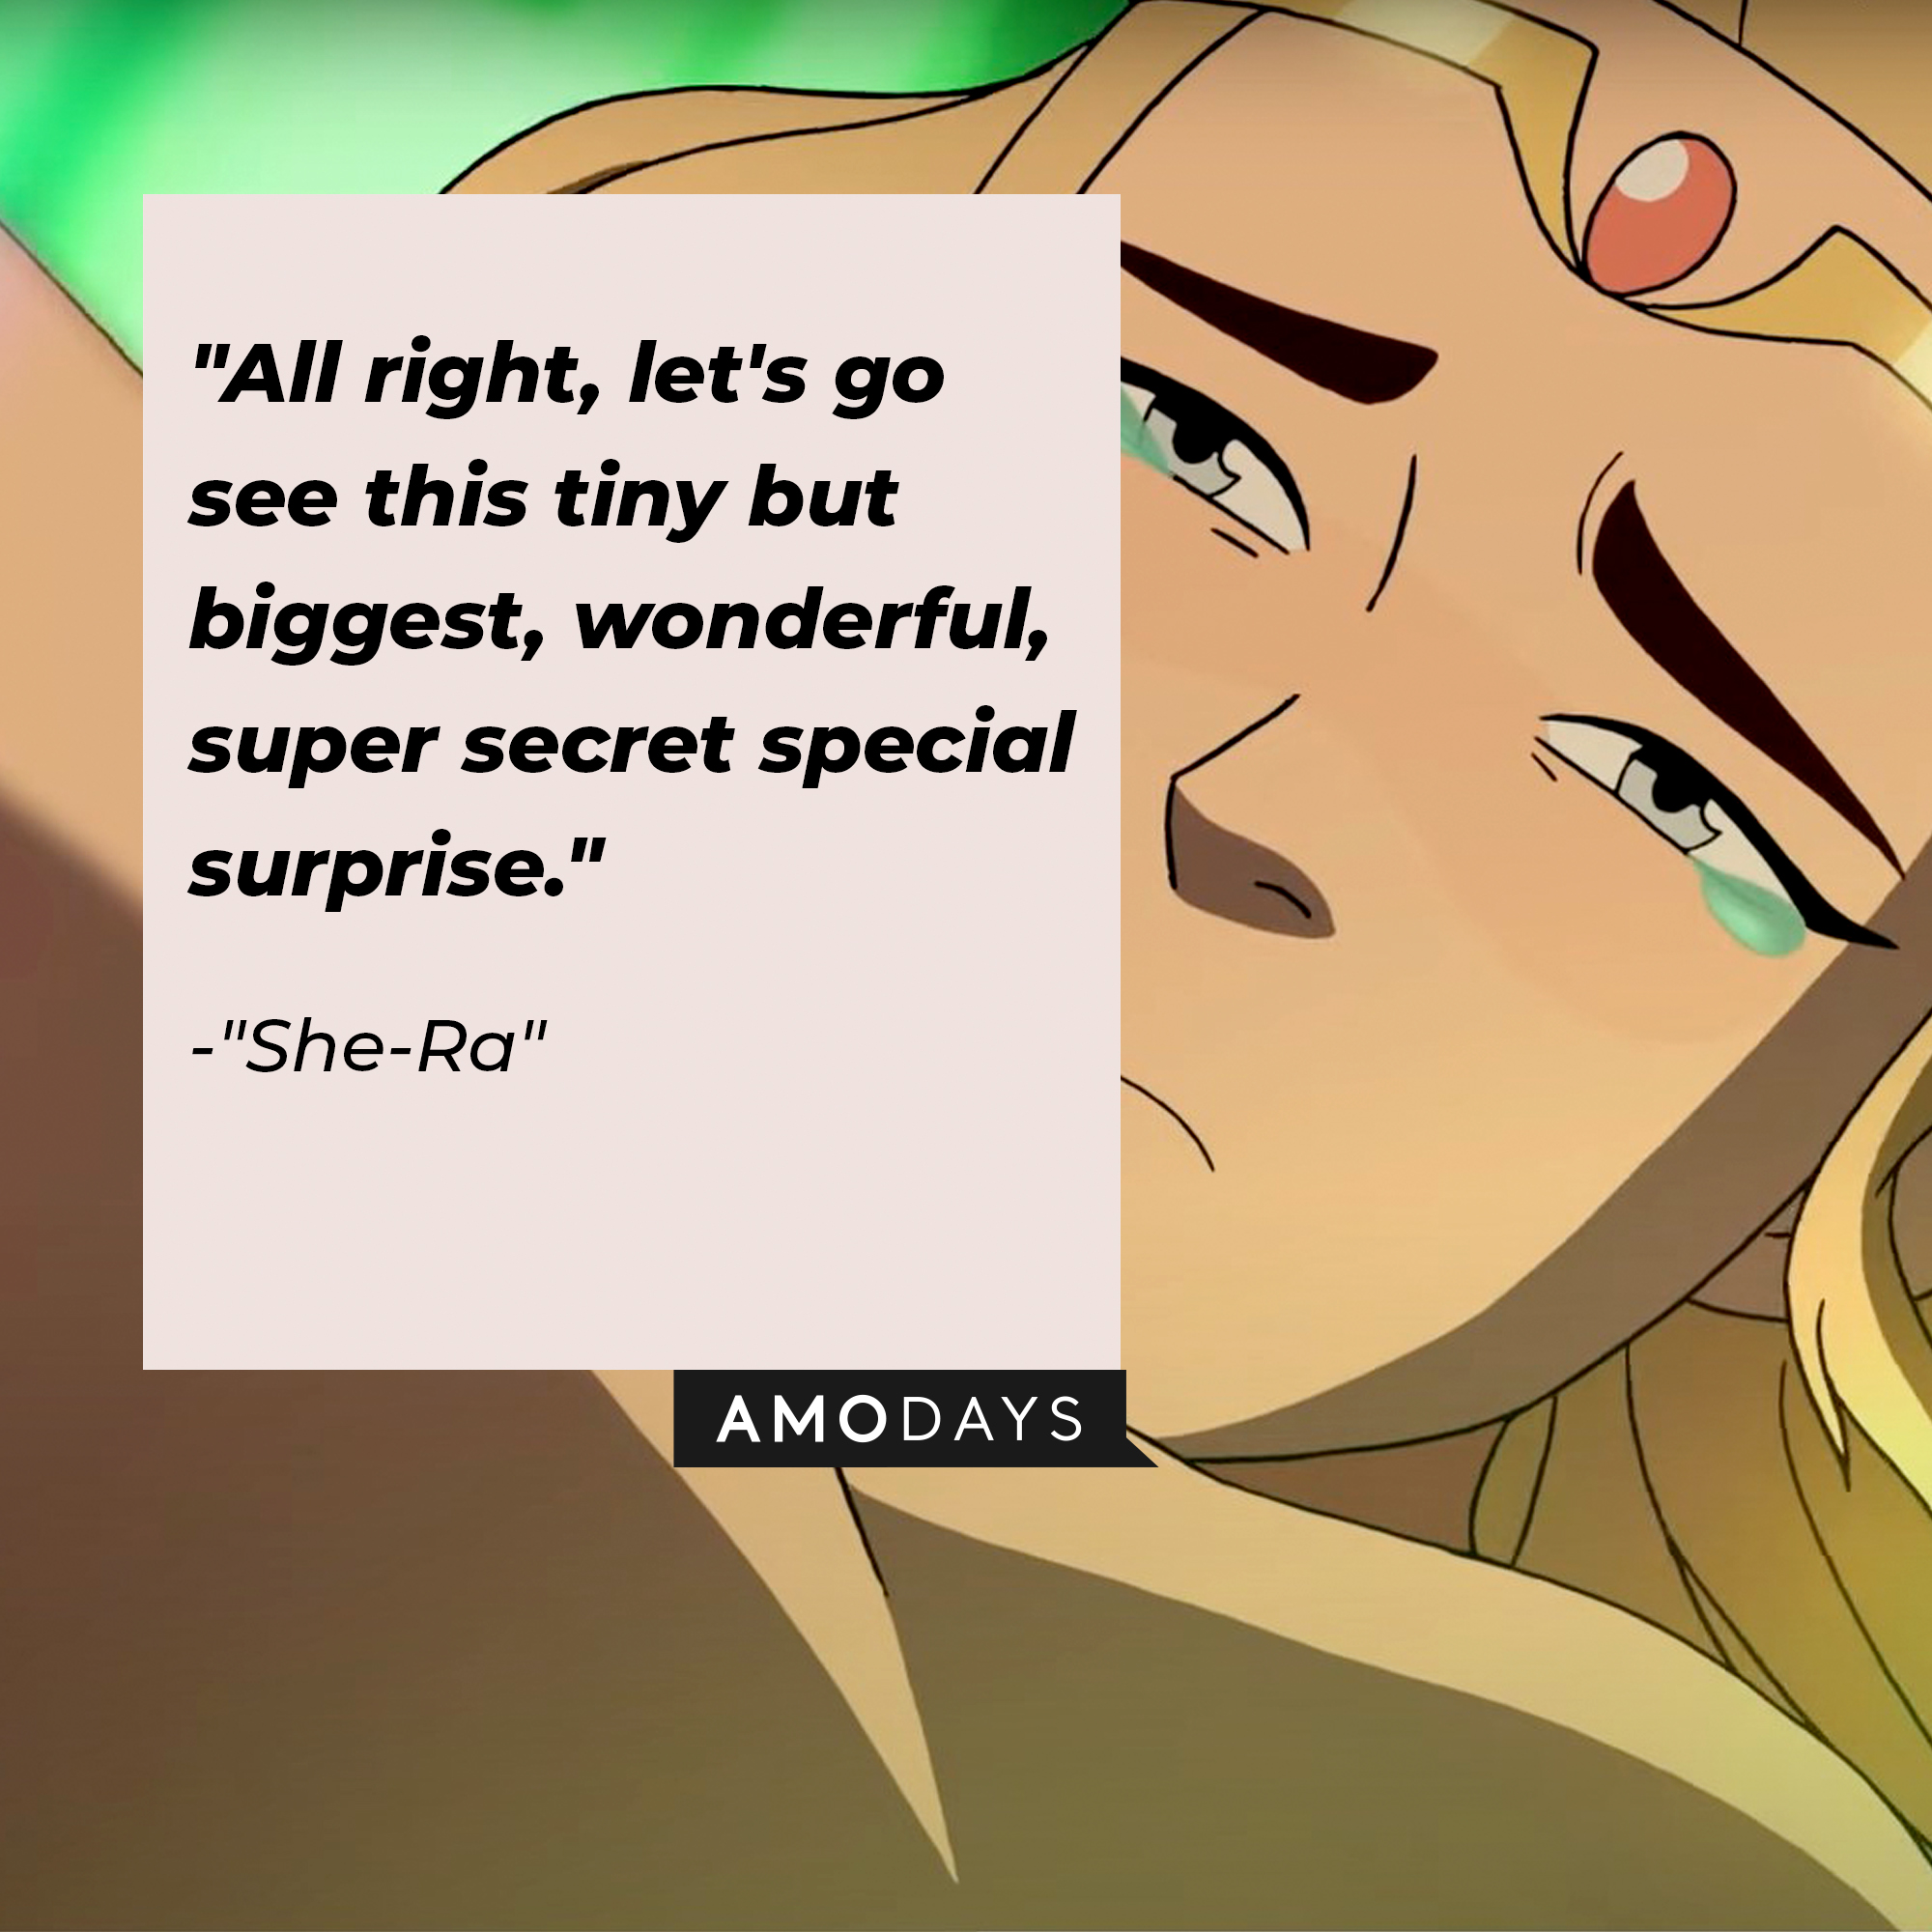 "She-Ra's" quote: "All right, let's go see this tiny but biggest, wonderful, super secret special surprise." | Source: Facebook.com/DreamWorksSheRa